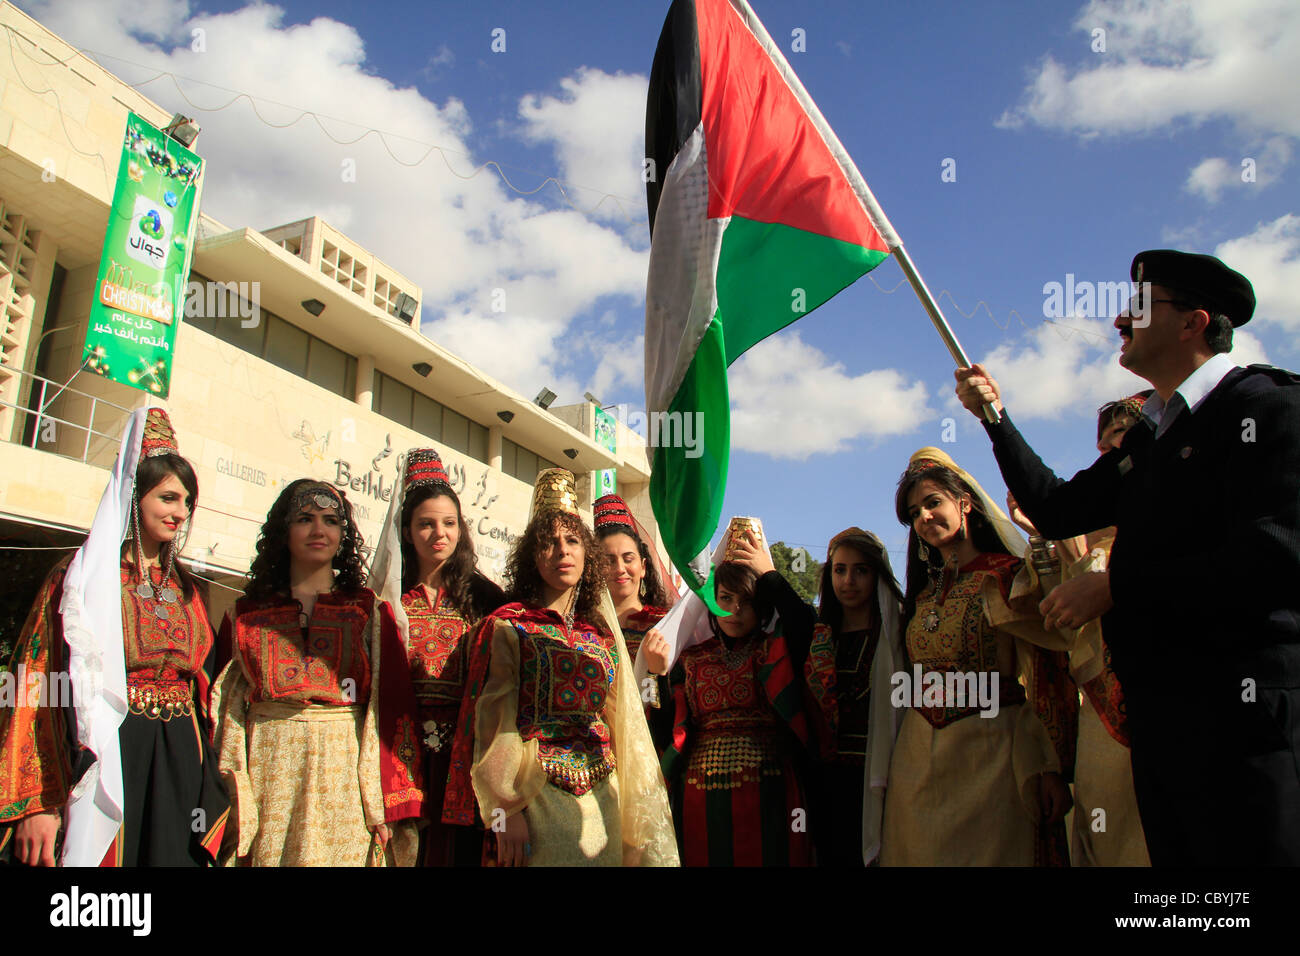 Christmas in Bethlehem, Palestinian girls in traditional dresses in Manger Square Stock Photo